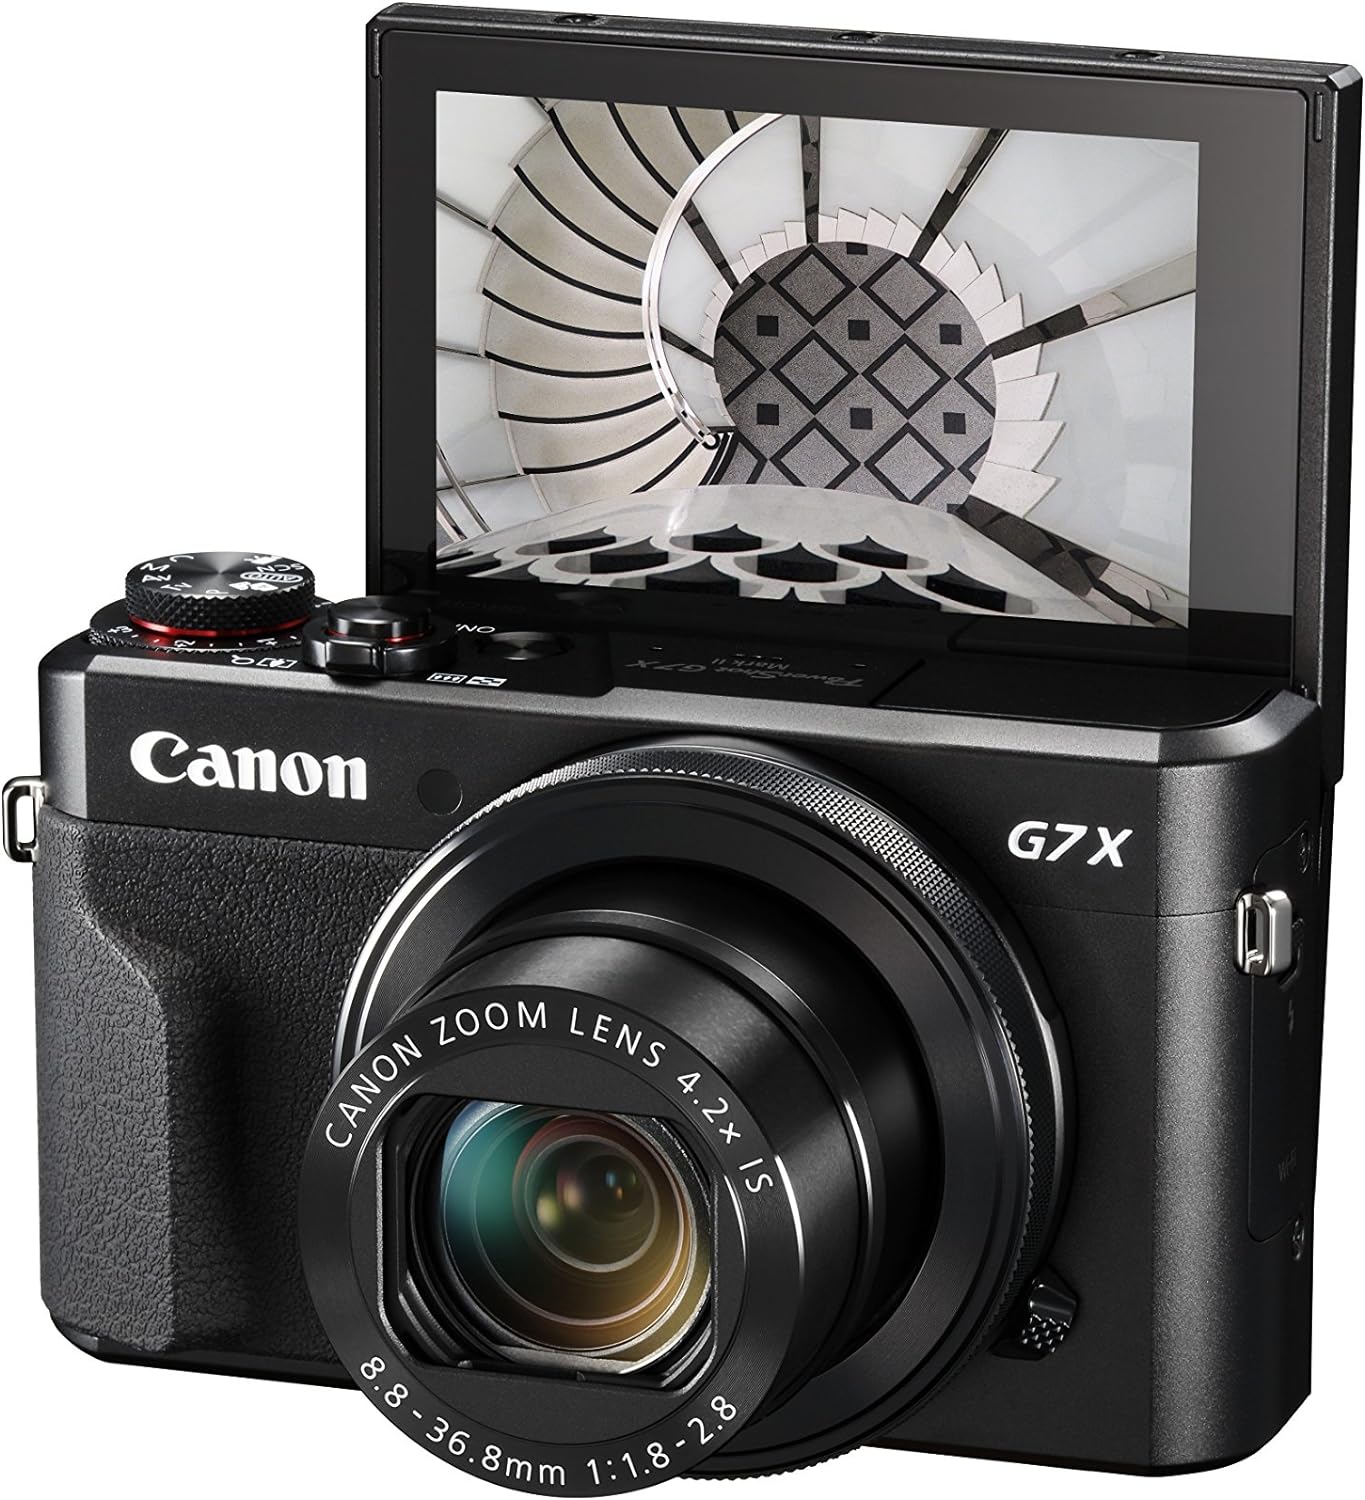 Canon Powershot G7 X Mark II Digital Camera Camera - Vlogging Camera with Full HD 60p movies, flip-up screen with superfast autofocus, 5-axis stabilisation, 20.1 Megapixels